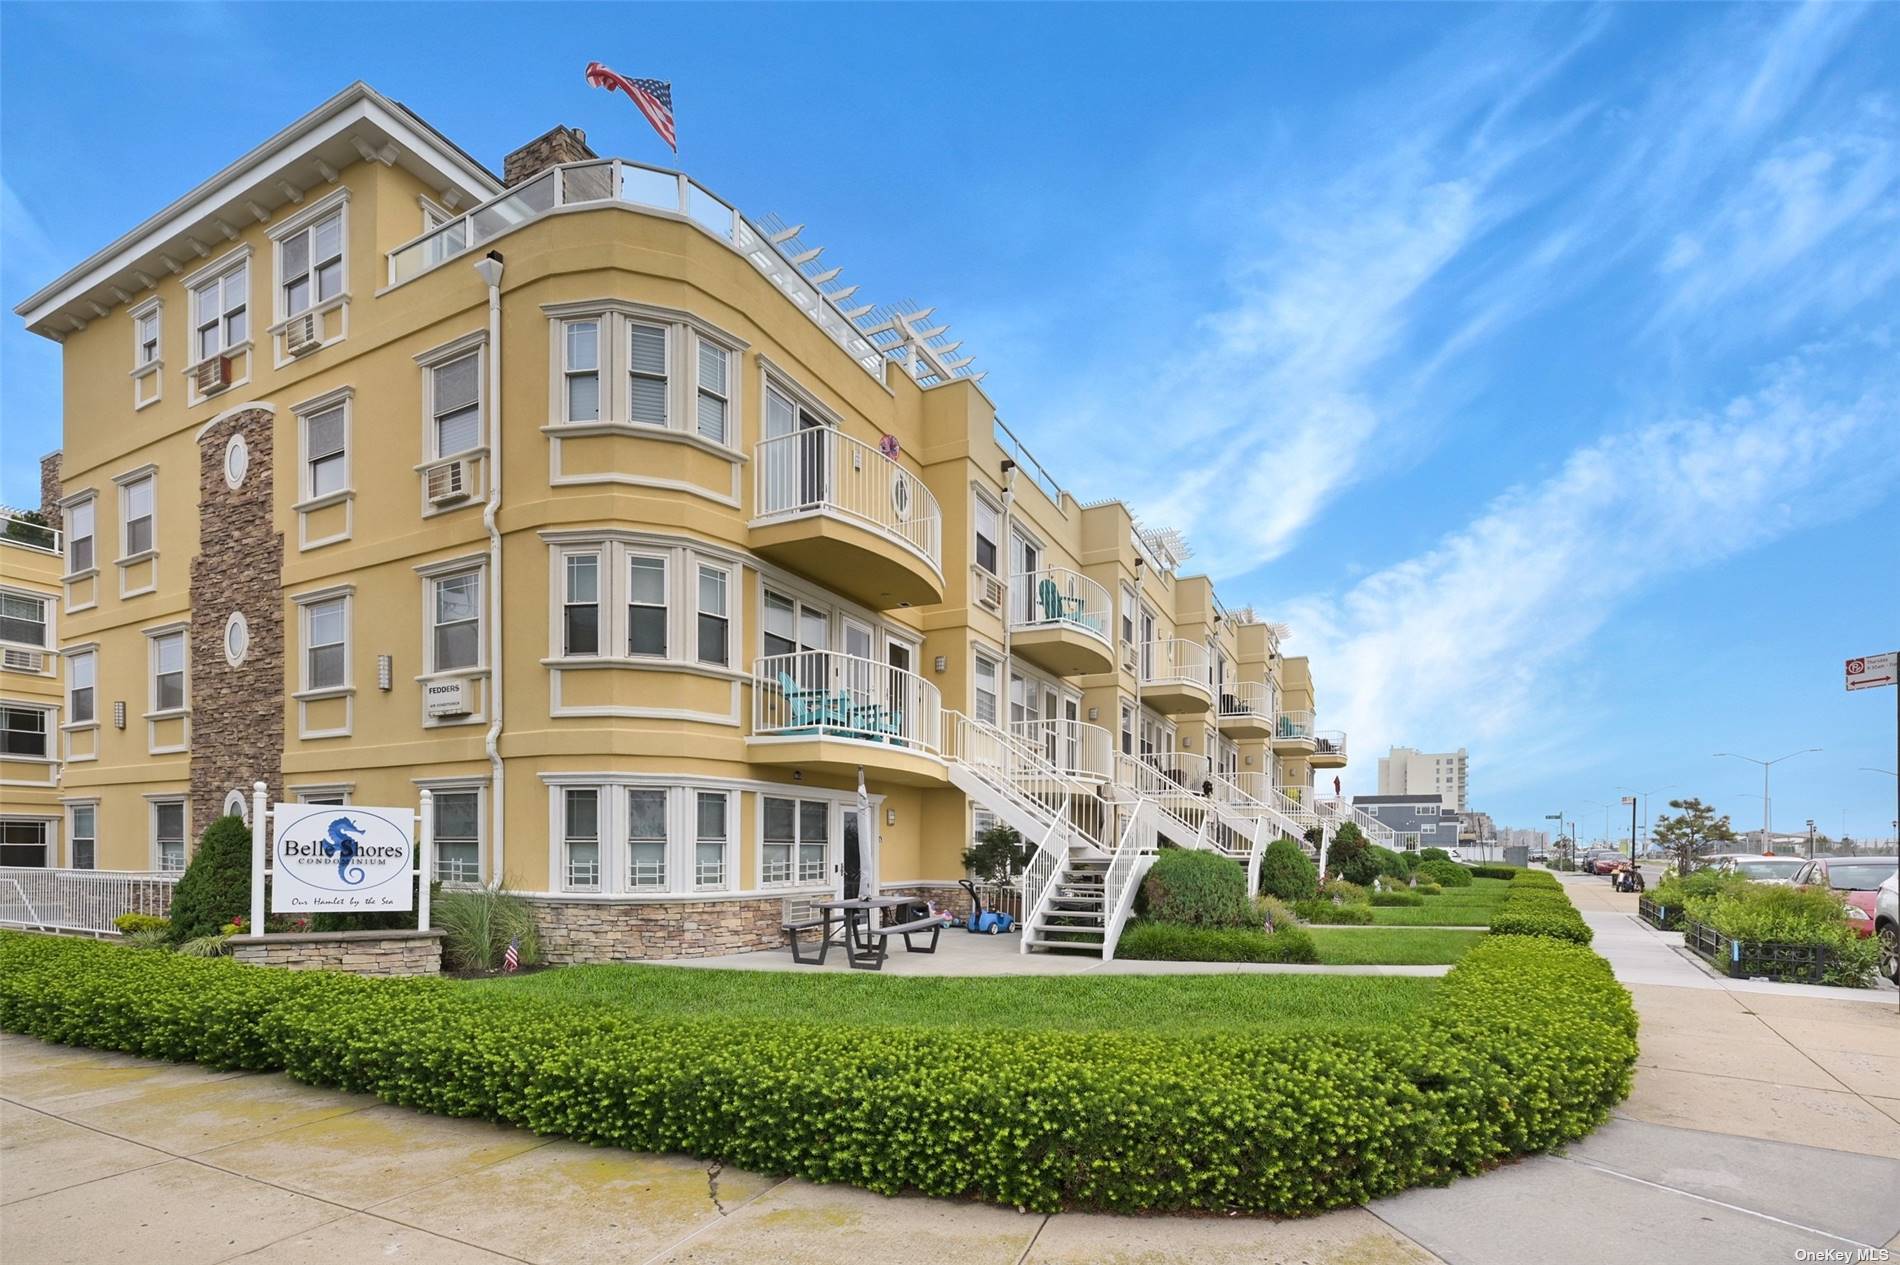 Belle Shores Full Ocean View Luxury 2nd Floor Condo For Sale, Designed In The California Malibu Style.